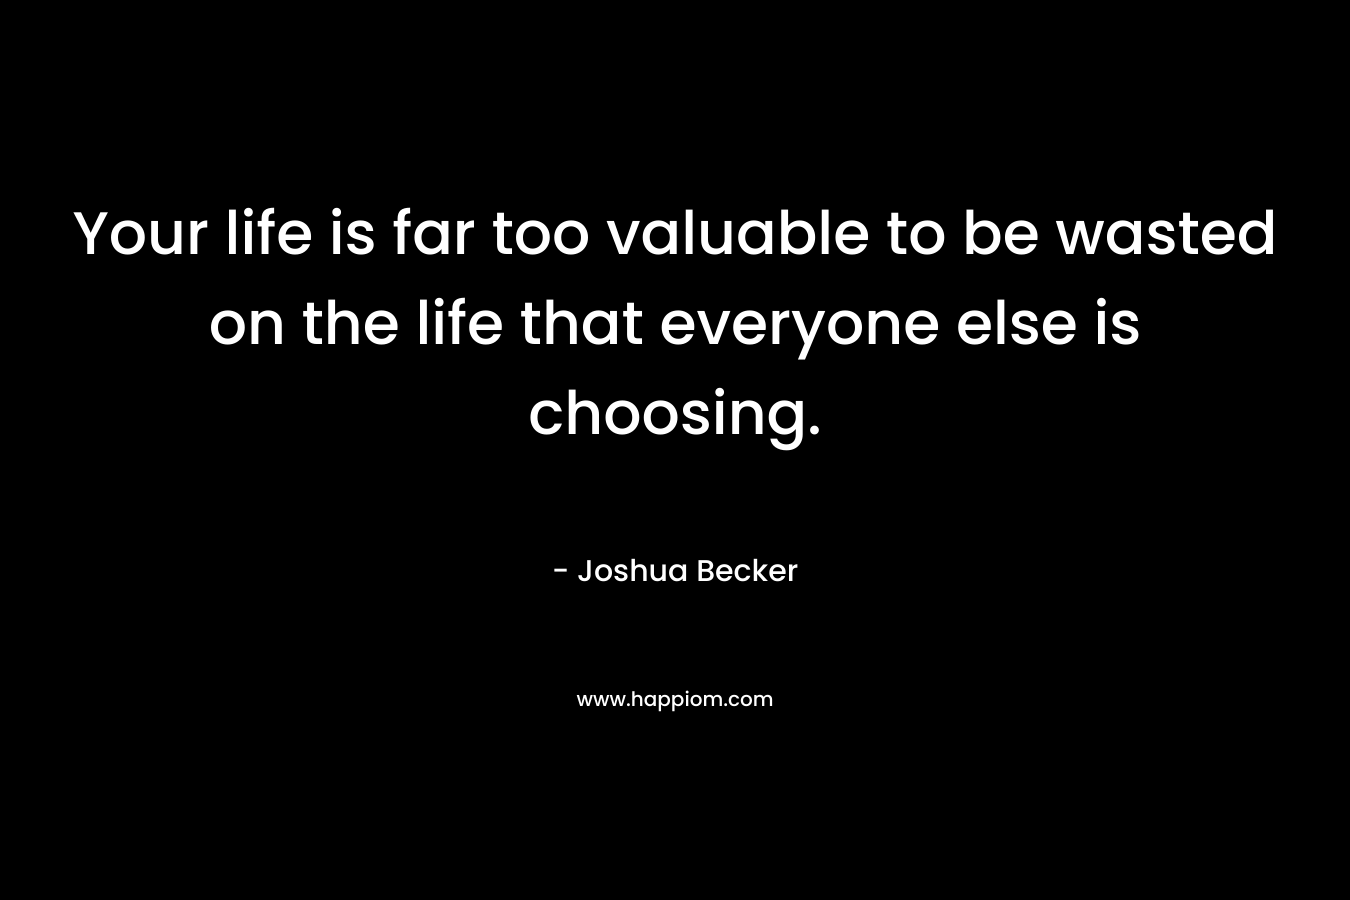 Your life is far too valuable to be wasted on the life that everyone else is choosing.